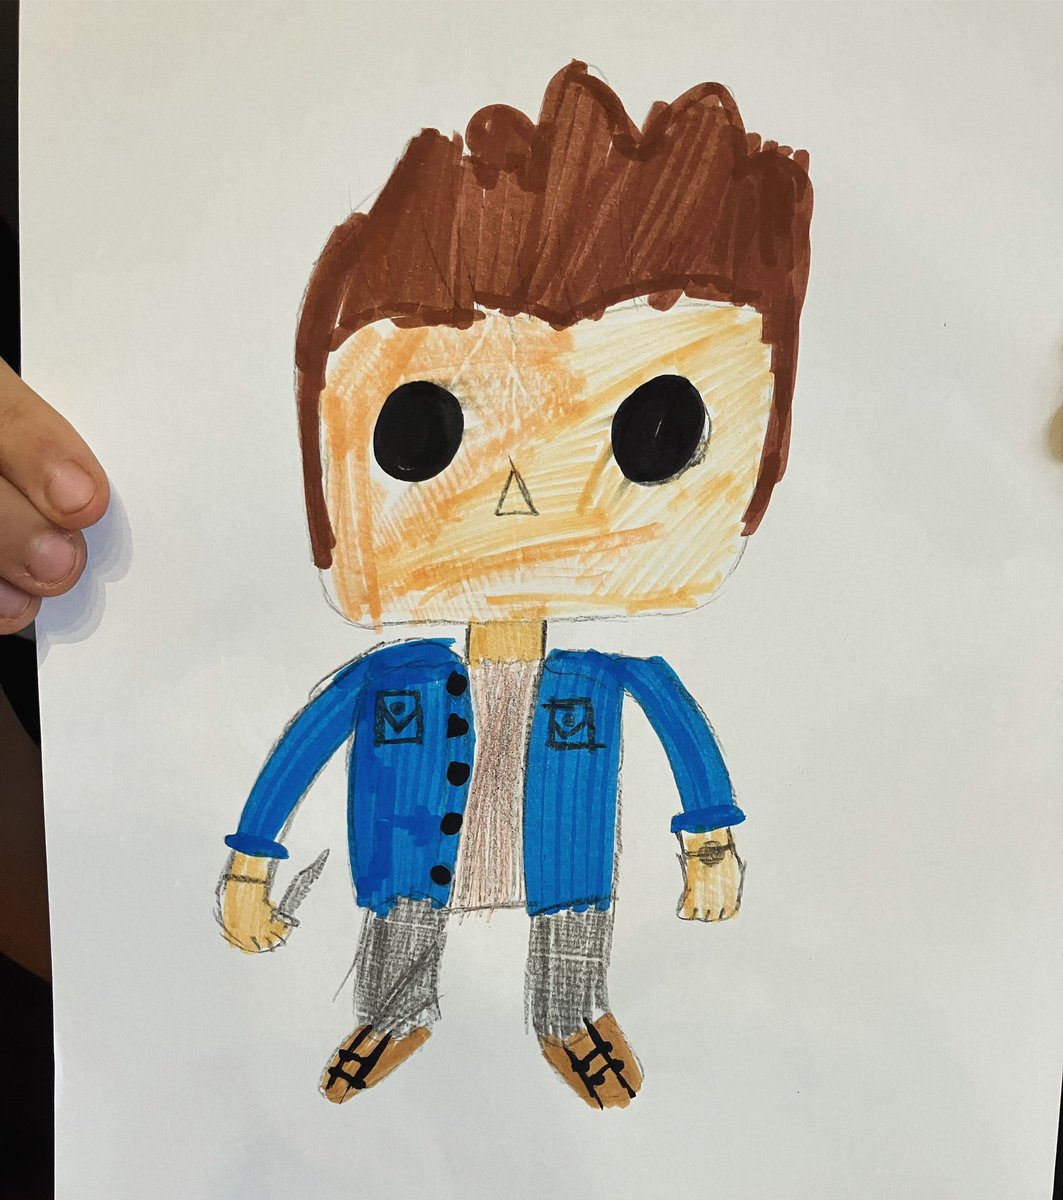 The spawn drew Dean Winchester and now I’m remembering why I procreated.

#supernatural #spn #SPNFamily #deanwinchester #kidsart #mumlife